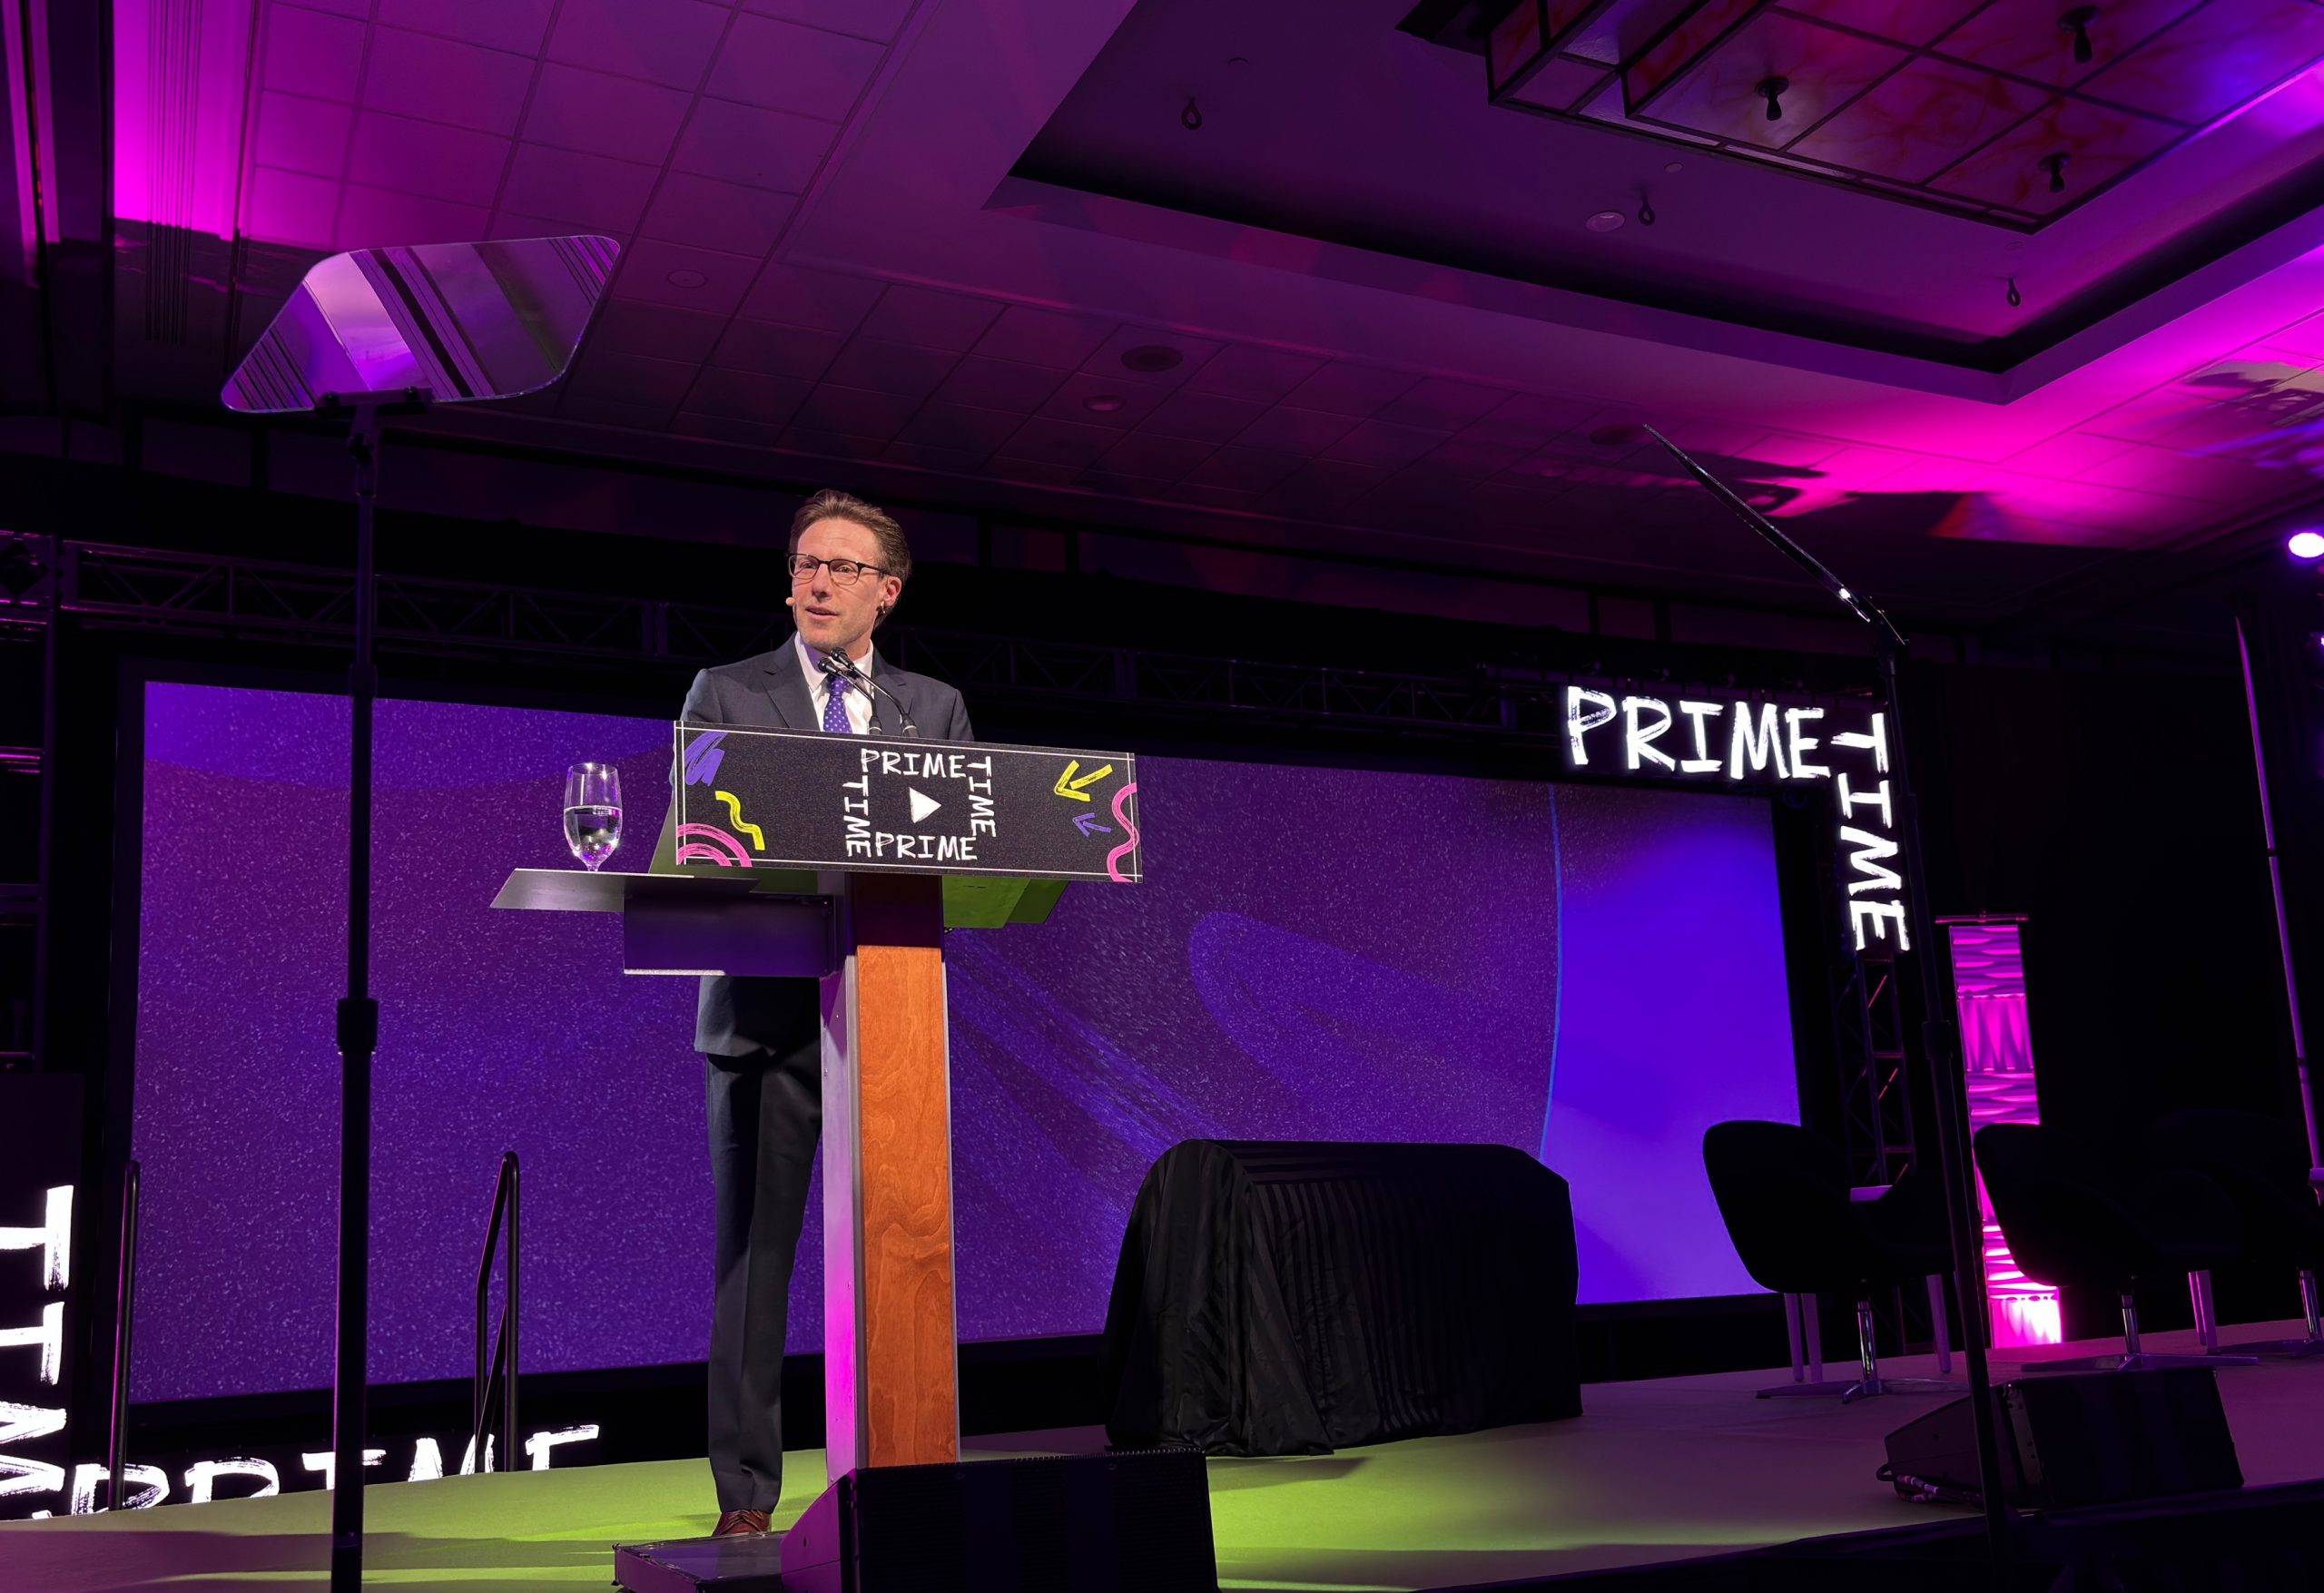 Attacks on CBC are concerning, says CMPA president at Prime Time